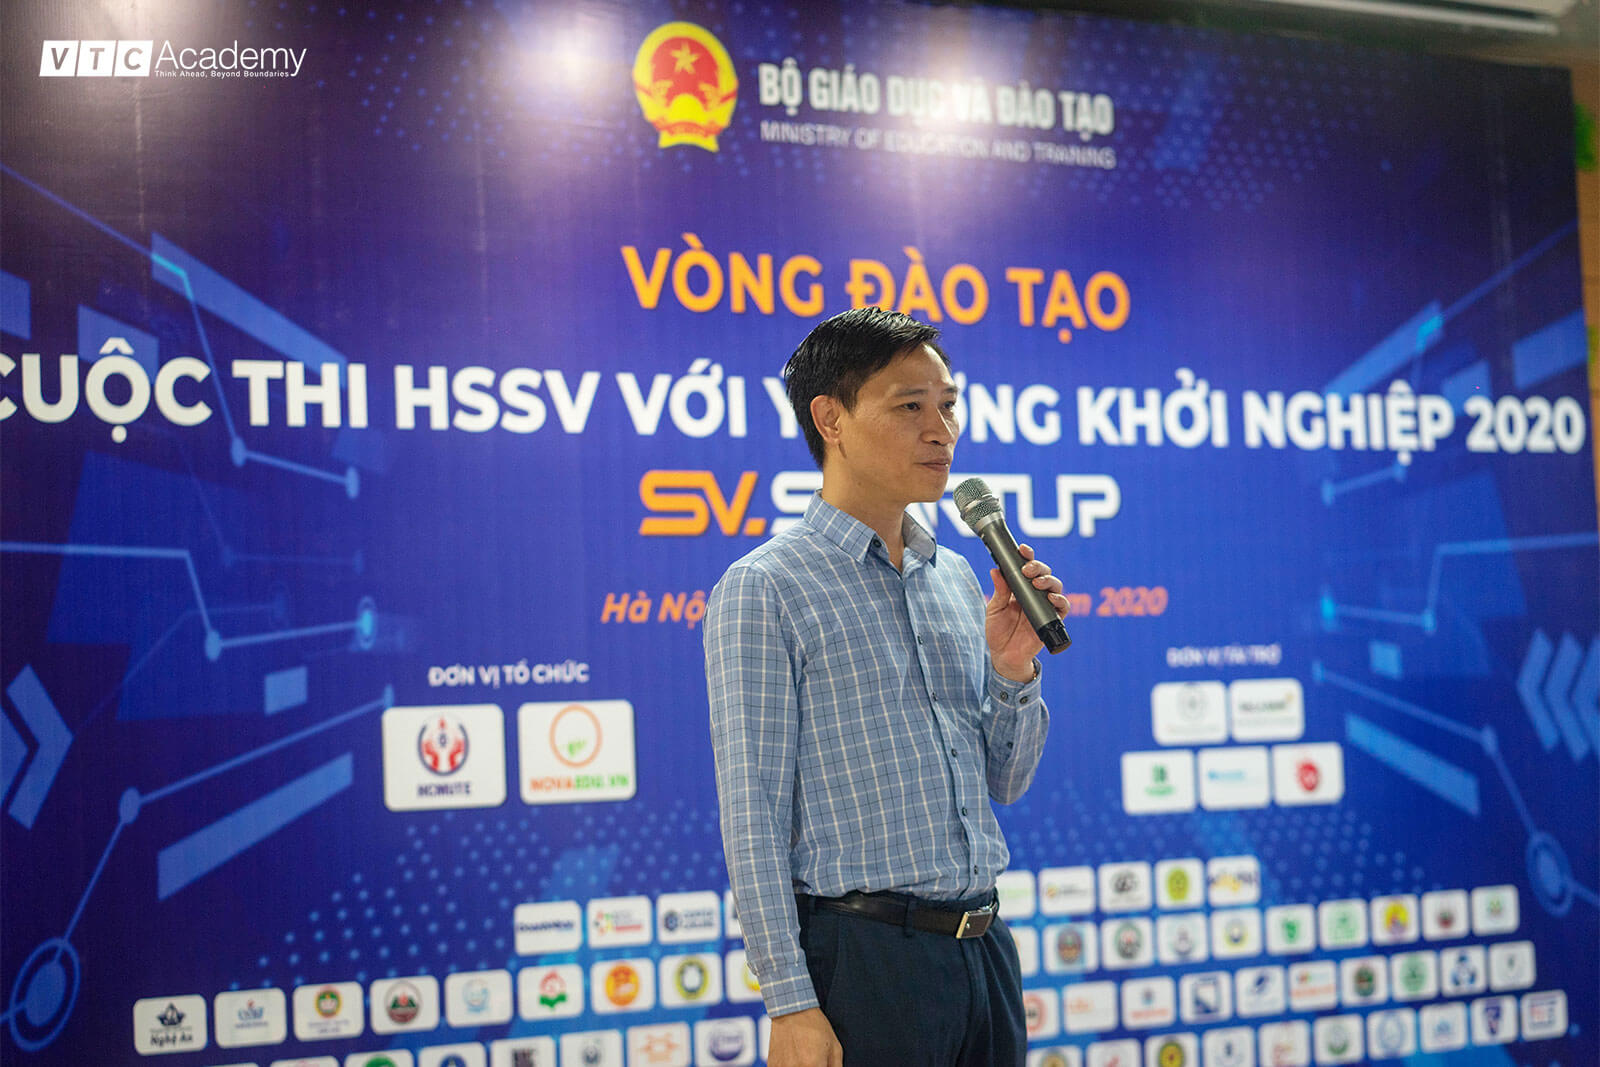 hssv-voi-y-tuong-sang-tao-vtc-academy-1